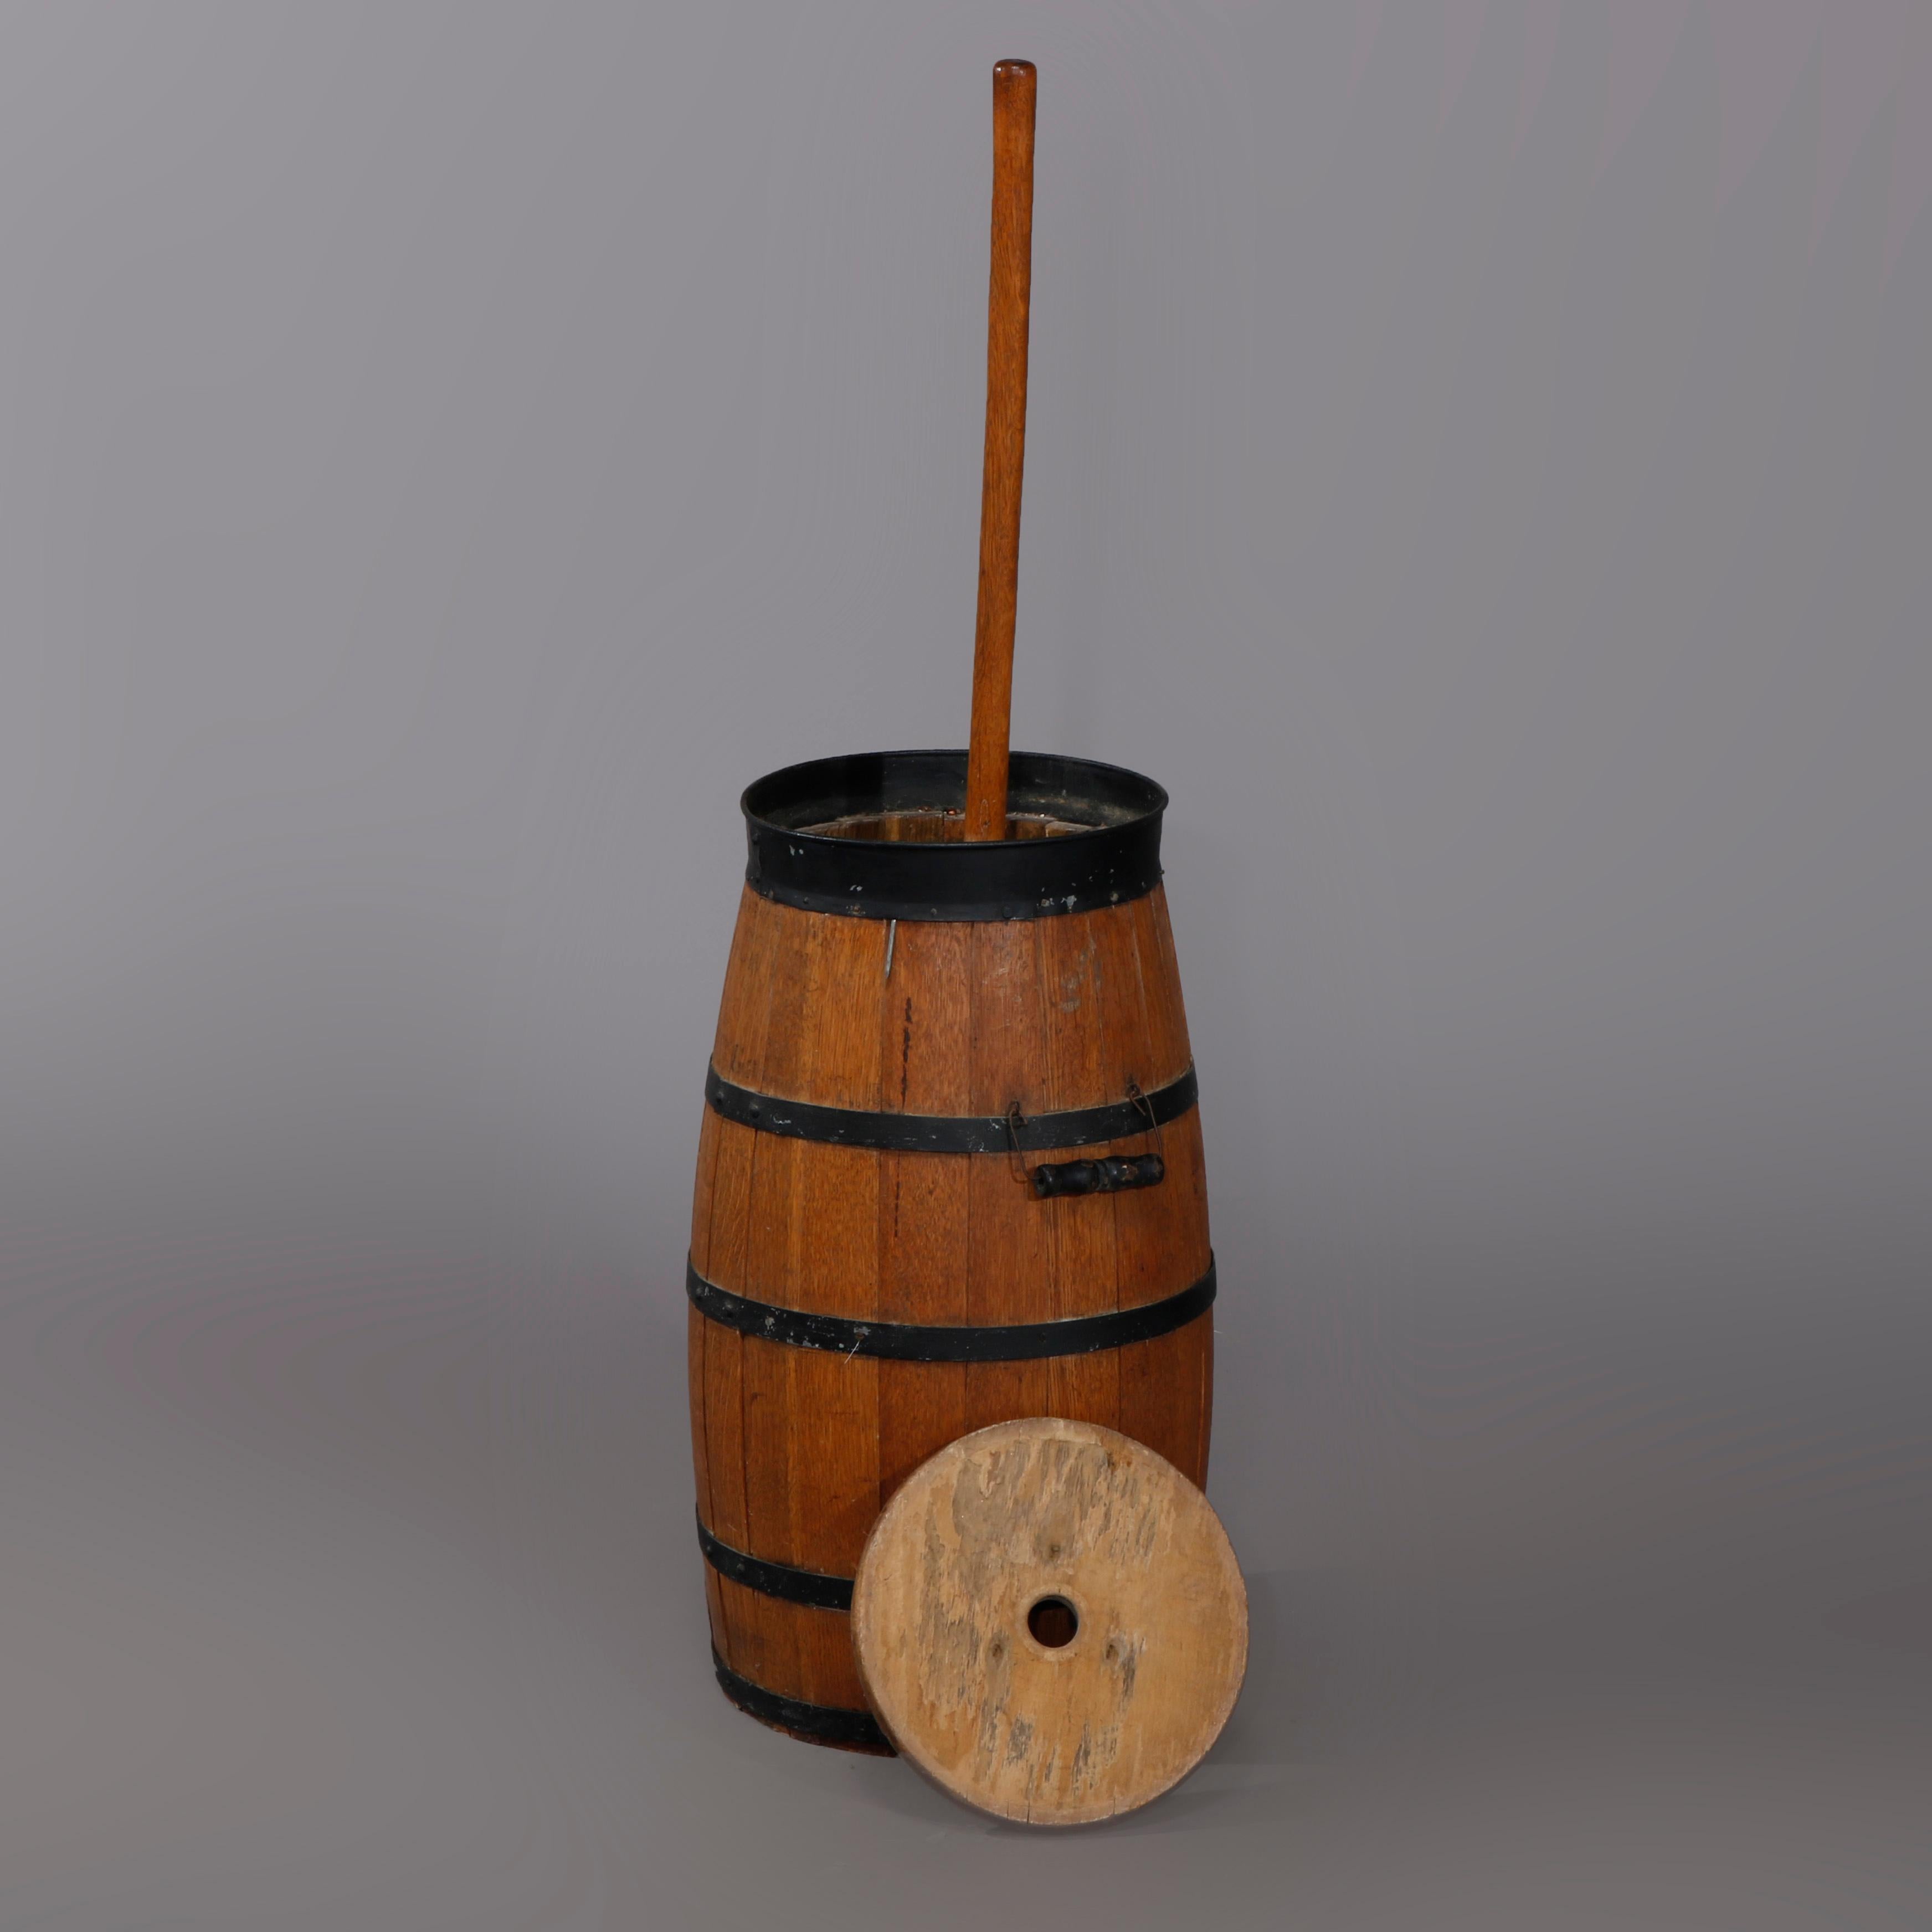 An antique Primitive butter churn offers oak construction with metal banding straps and handles, 19th century
Oak butter churn, 19th century

Measures- 42.25